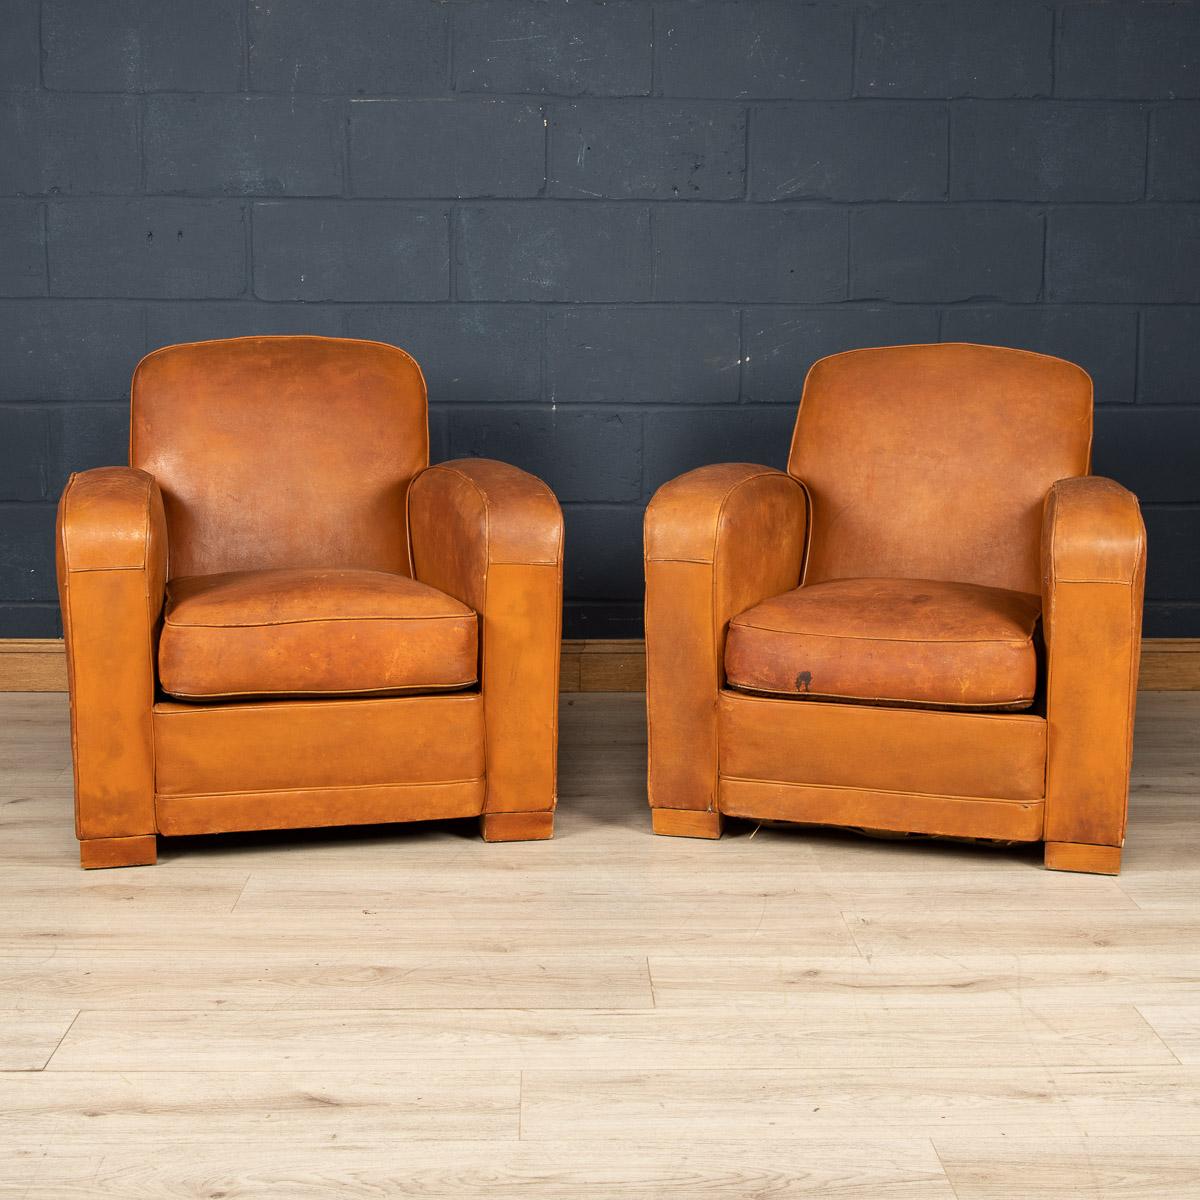 A gorgeous pair French leather club chairs, circa 1950. These armchairs have perennially oozed class and sophistication from the day they were made in the middle of the 20th century through to the modern day. These being the ever popular Art Deco